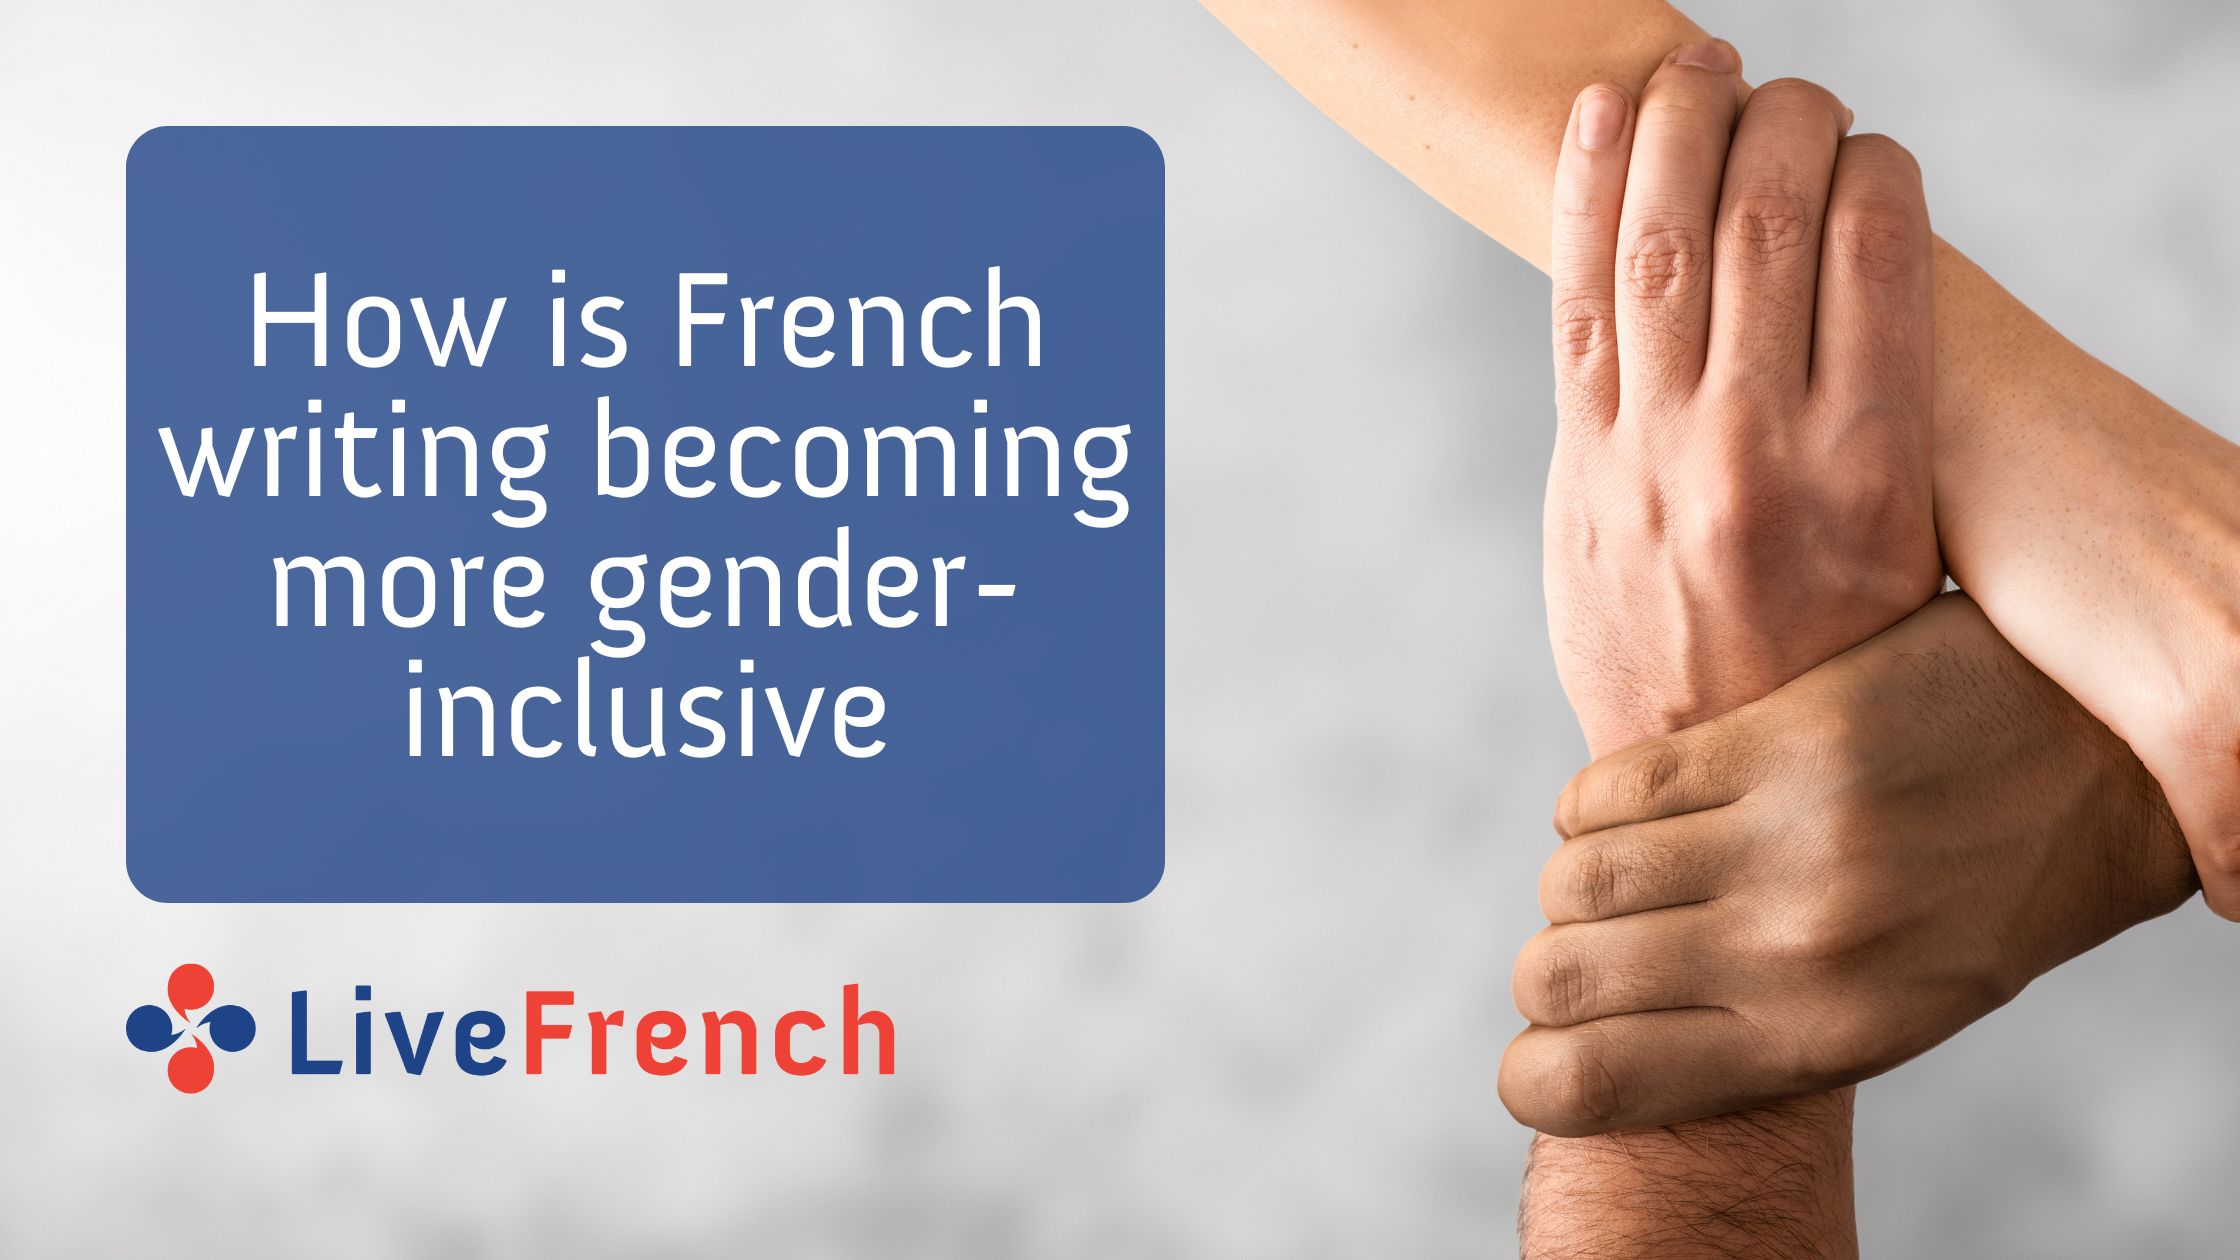 How is French writing becoming more gender-inclusive